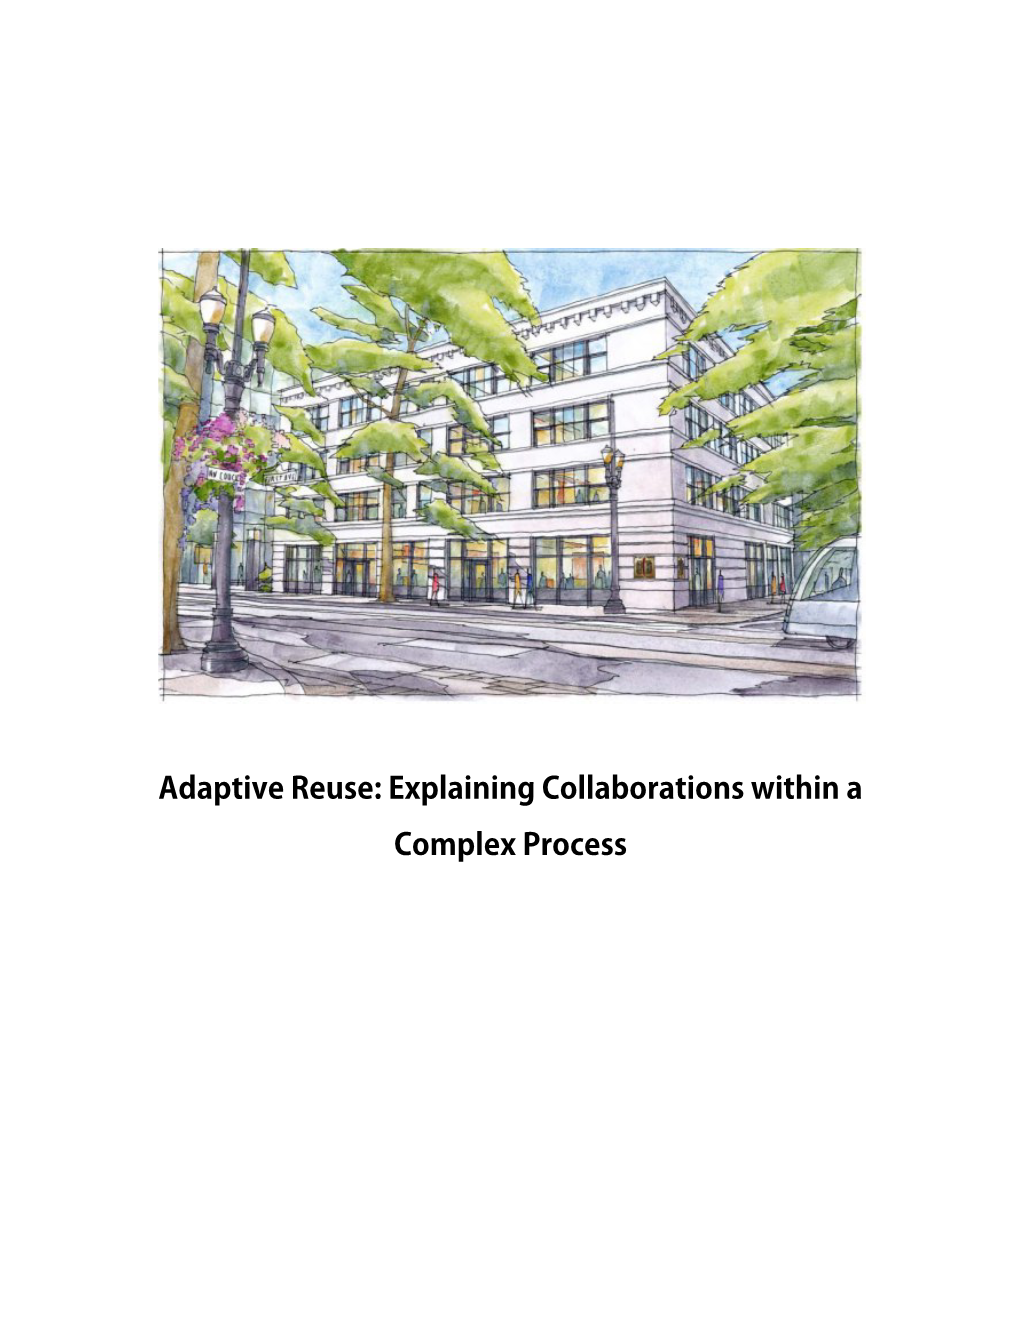 Adaptive Reuse: Explaining Collaborations Within a Complex Process